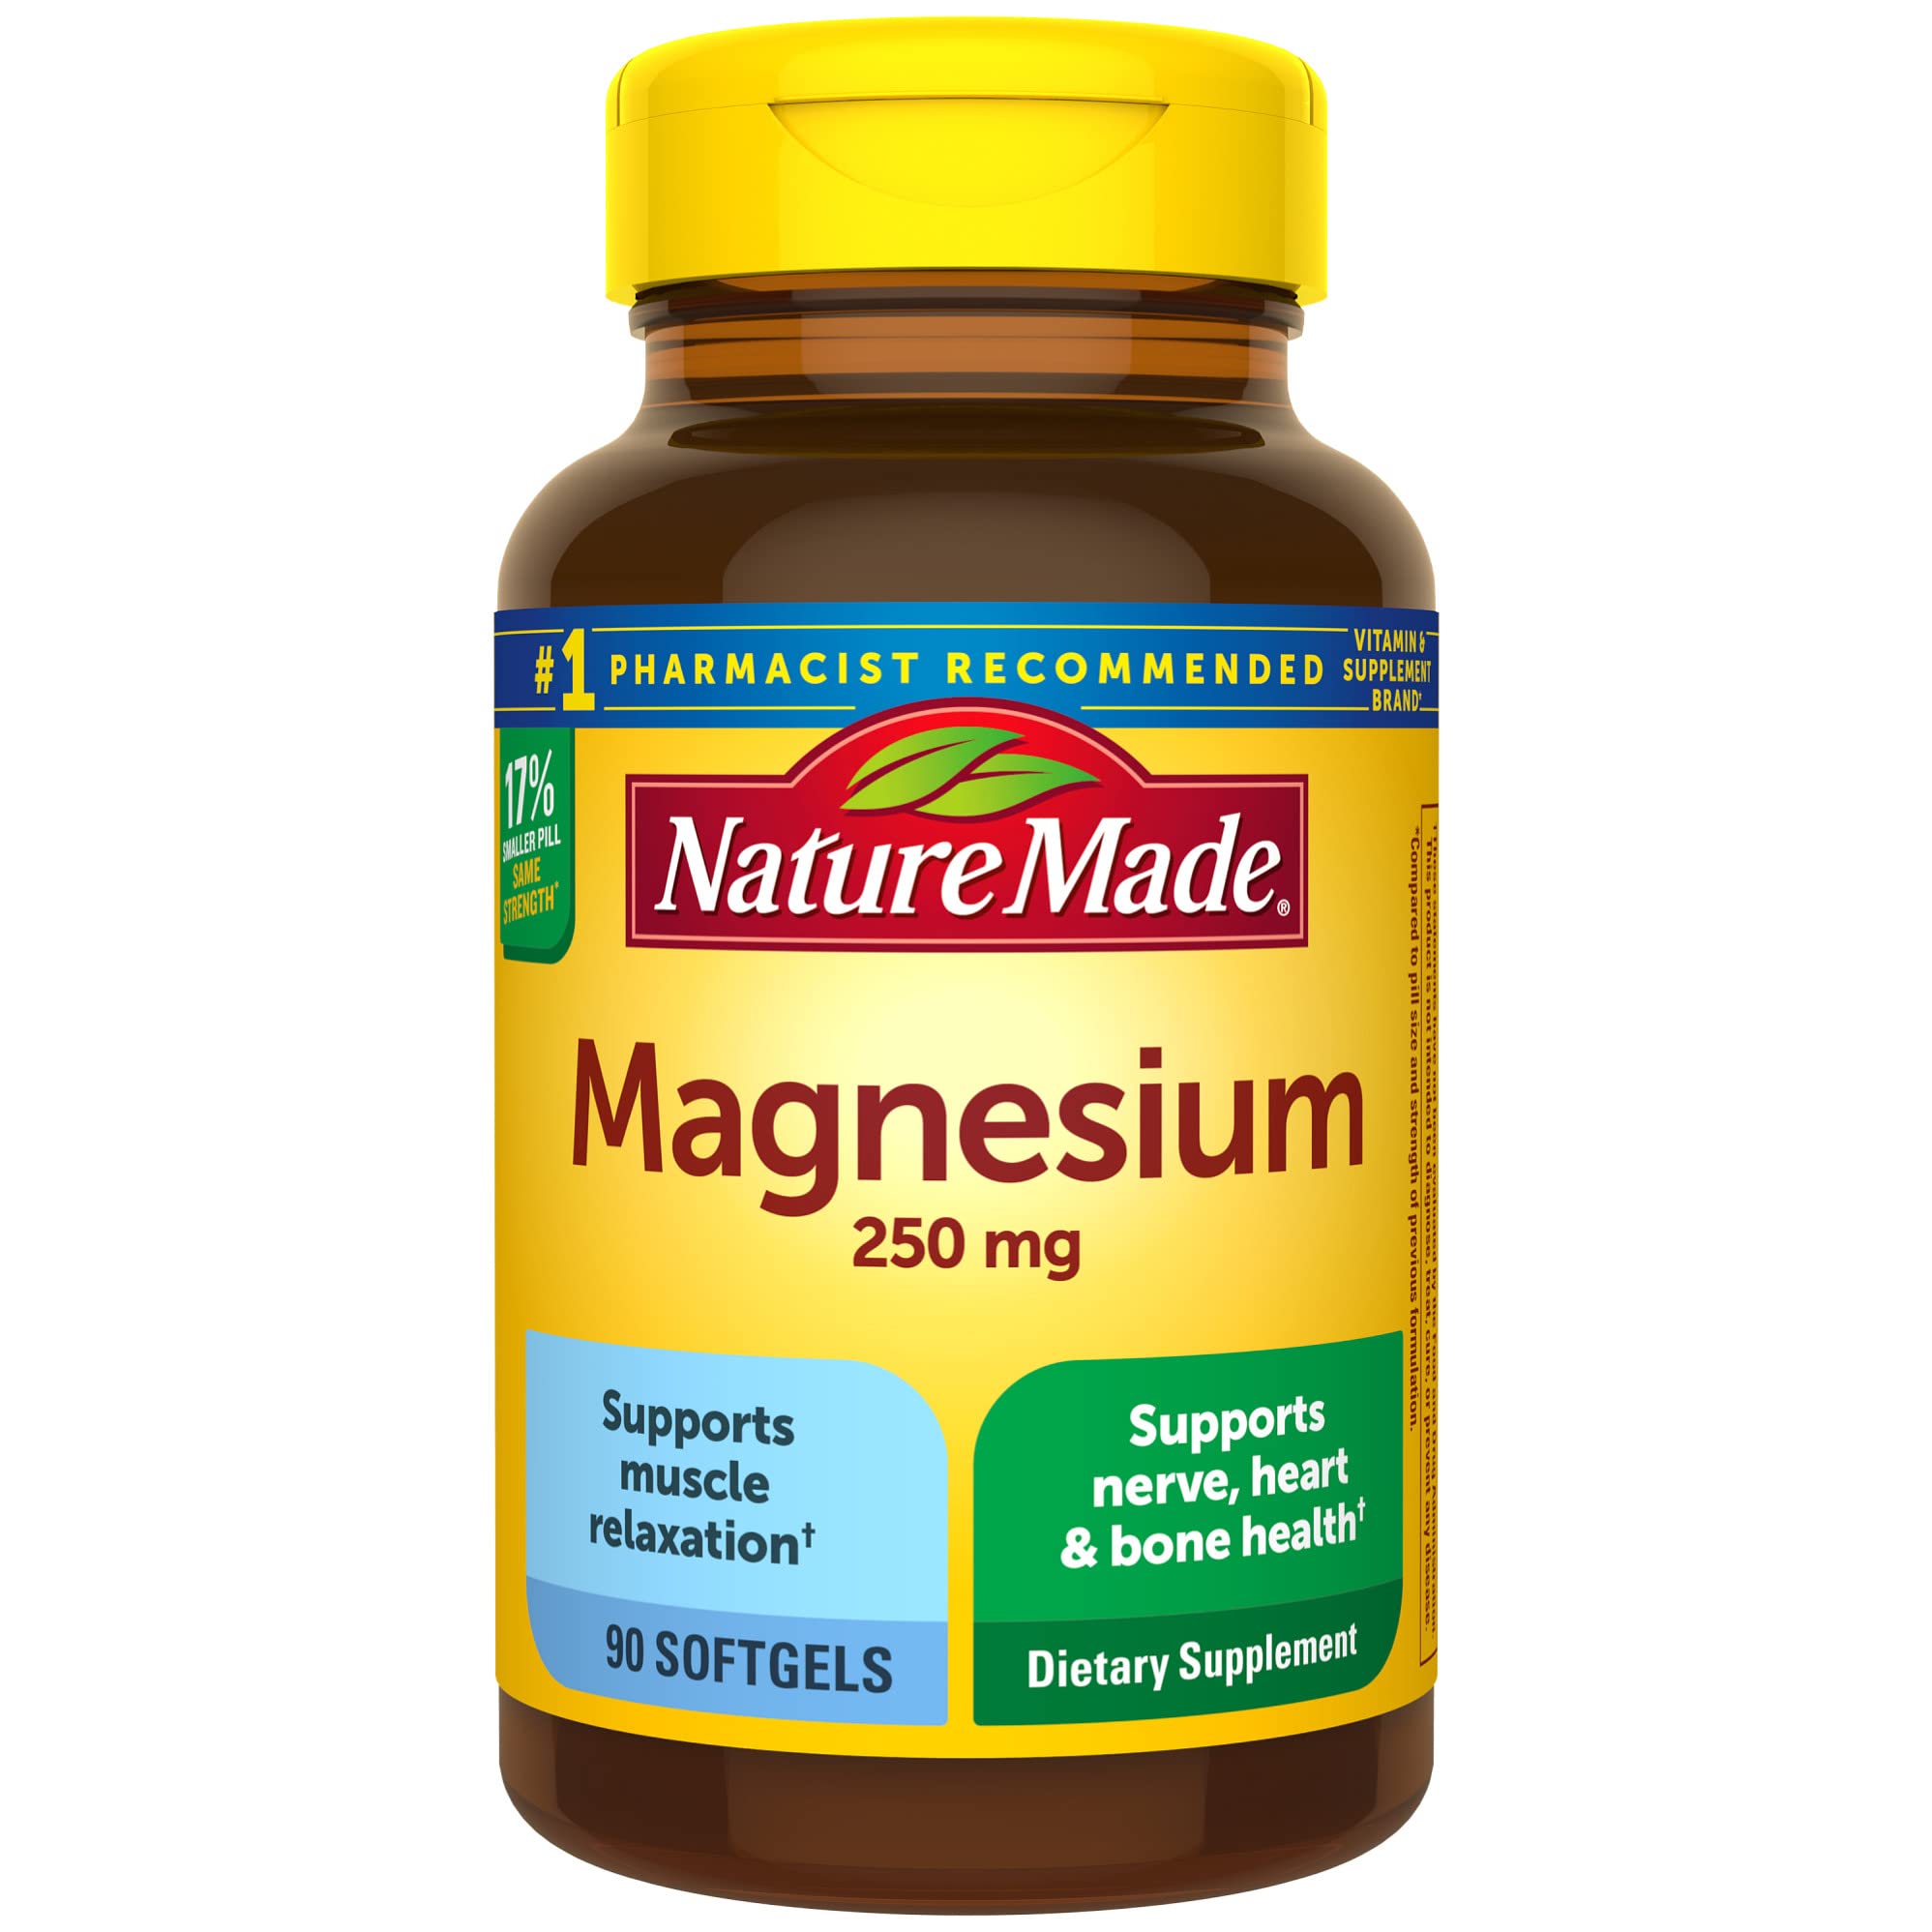 Nature Made Magnesium 250 mg, Dietary Supplement for Muscle, Heart, Bone and Nerve Support, 90 Softgels, 90 Day Supply